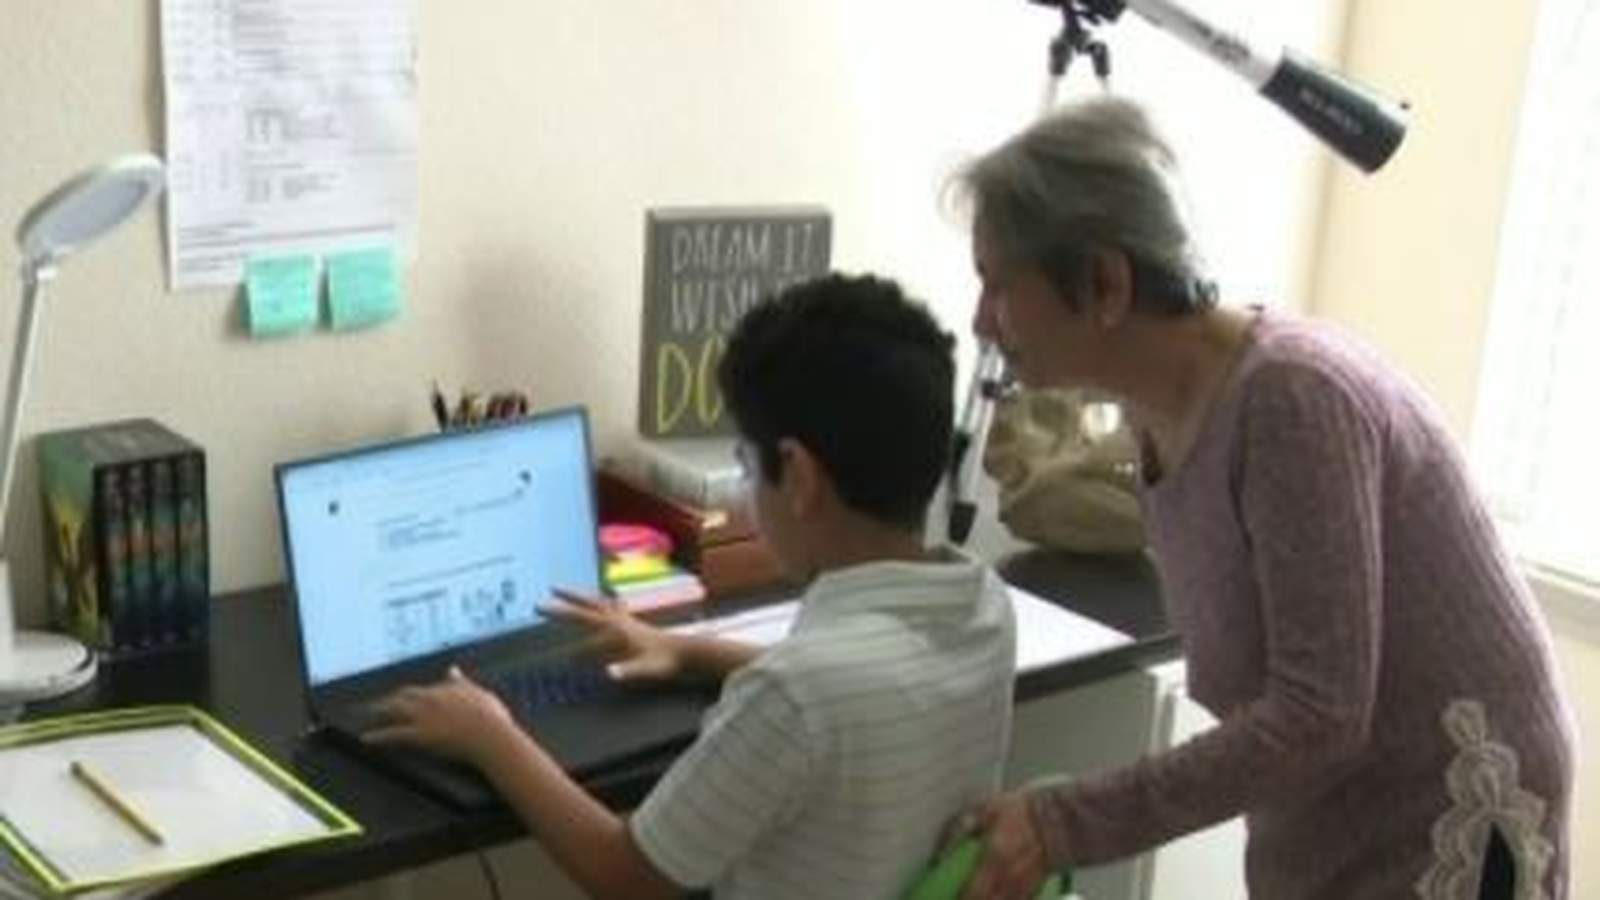 Family members help with virtual learning during pandemic